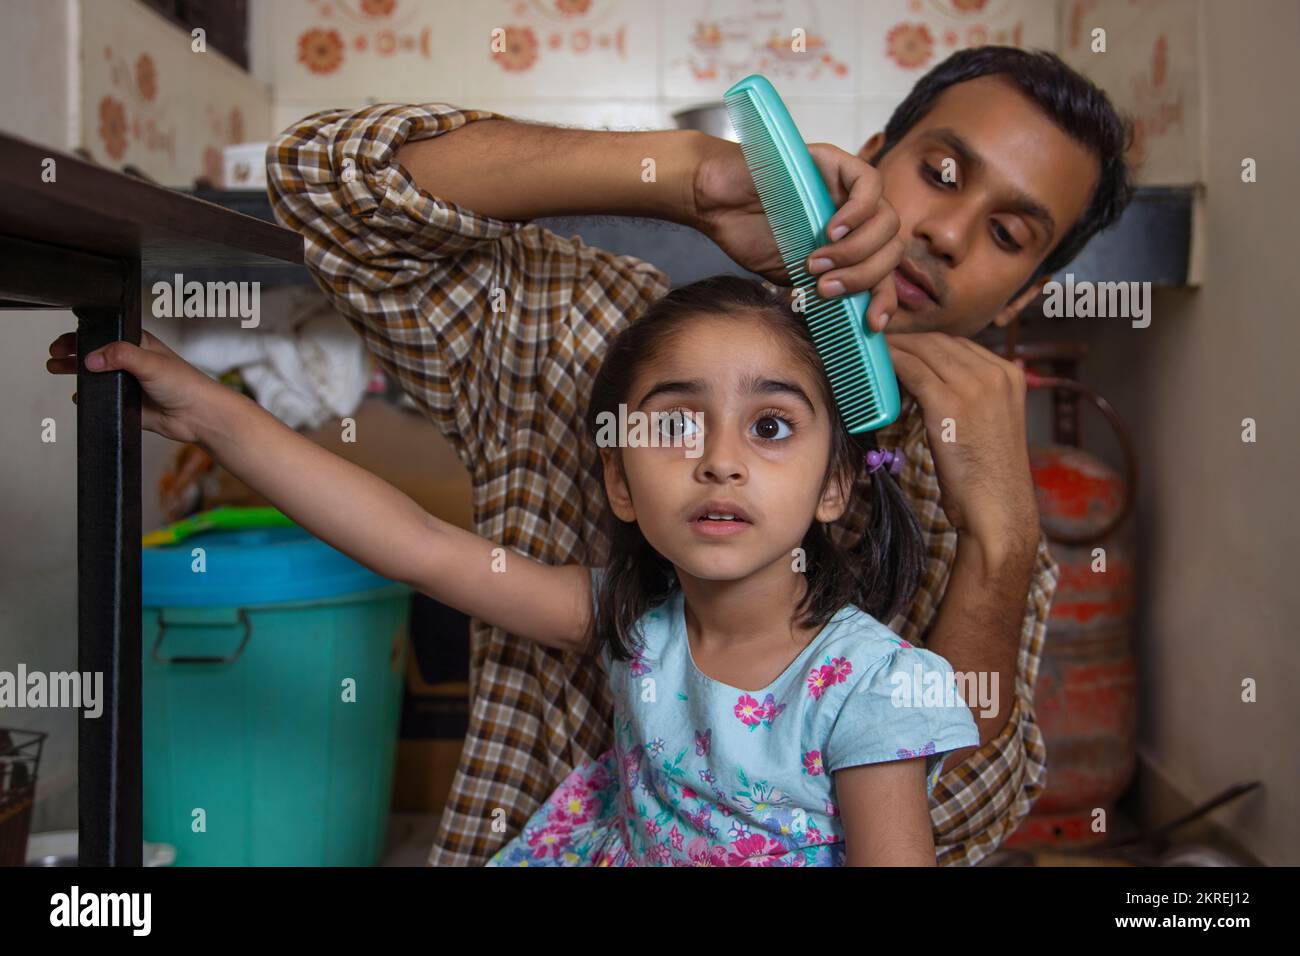 Father combing his daughter's hair in the kitchen Stock Photo